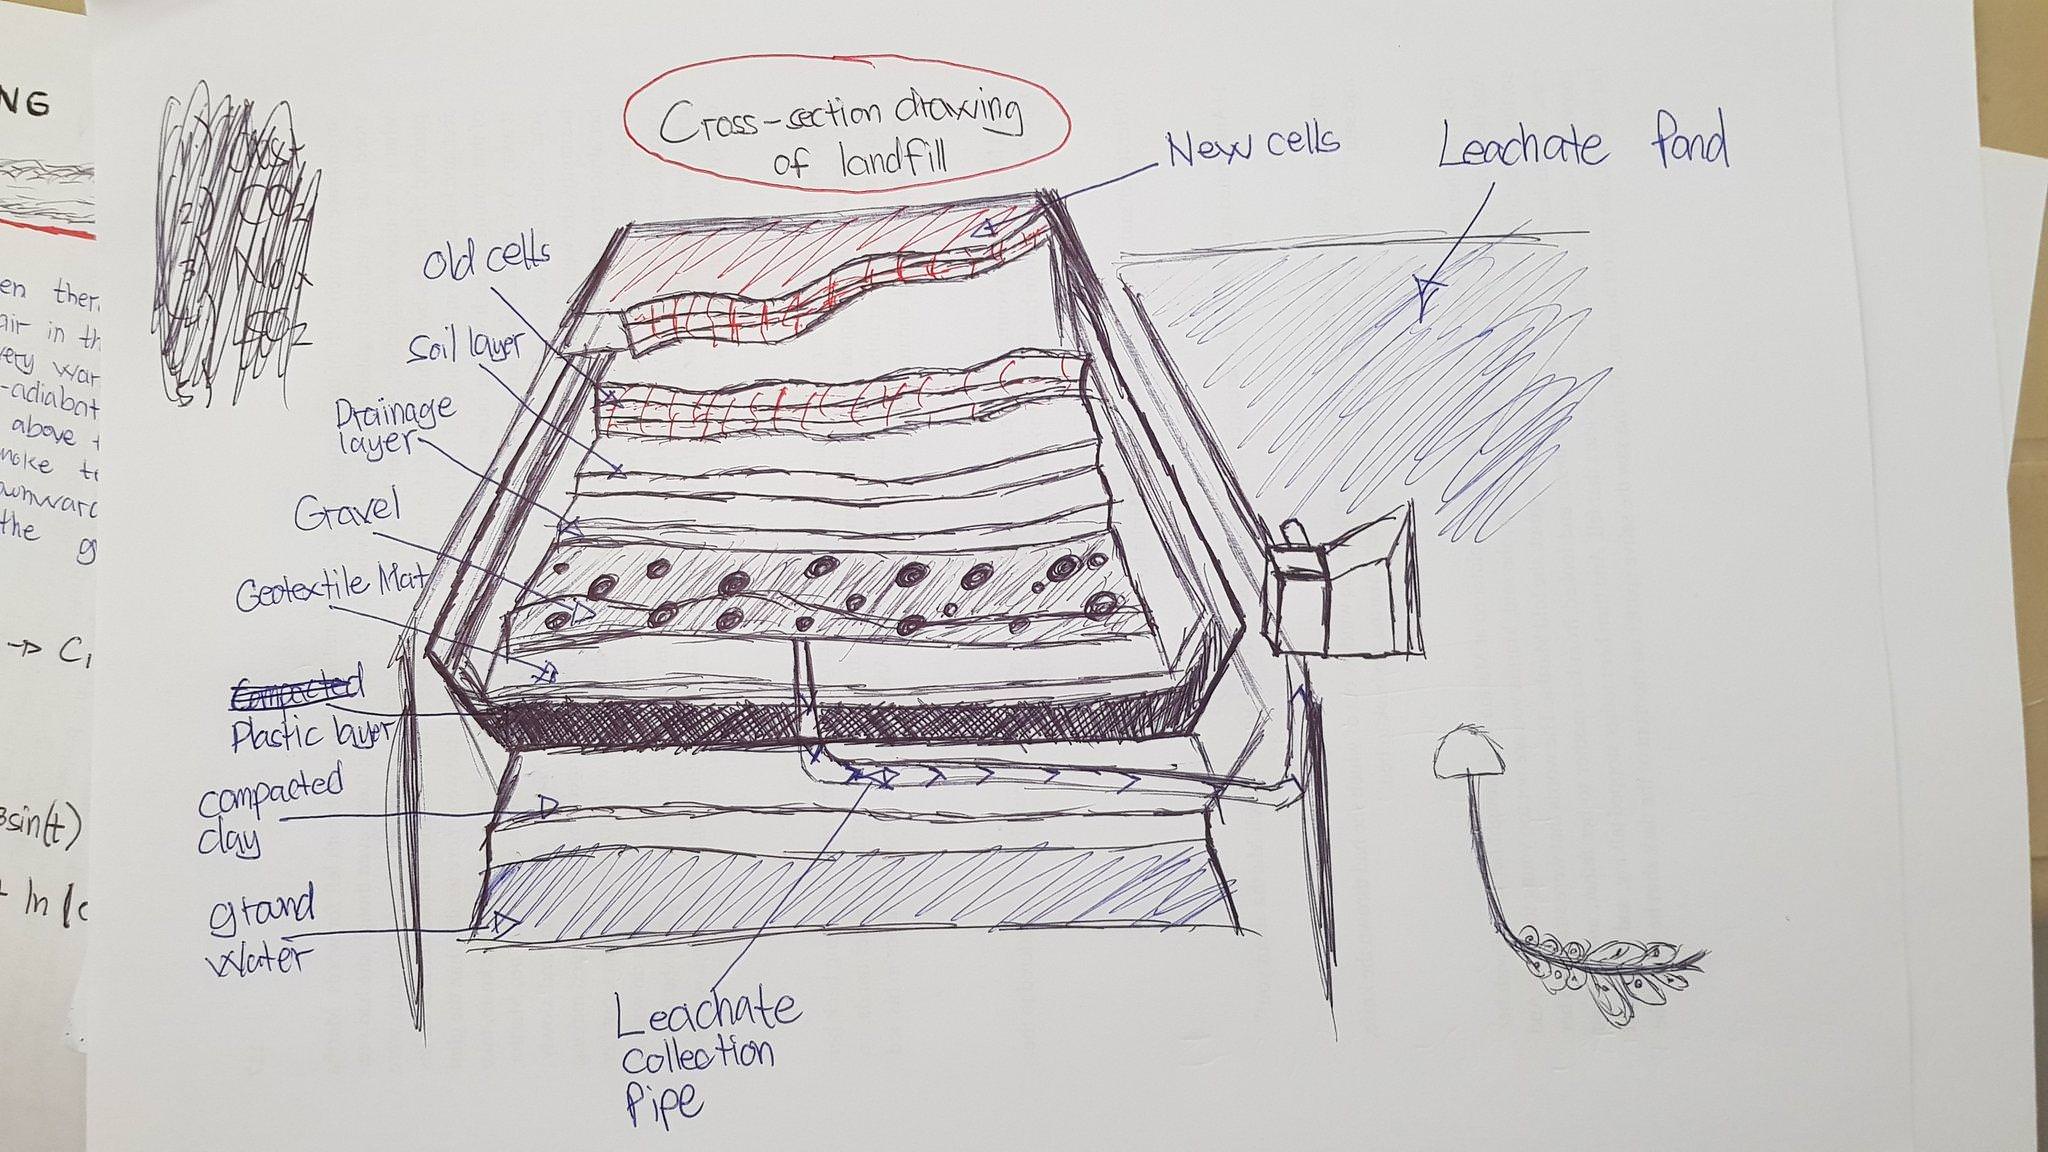 Landfill Sketch at Explore collection of Landfill